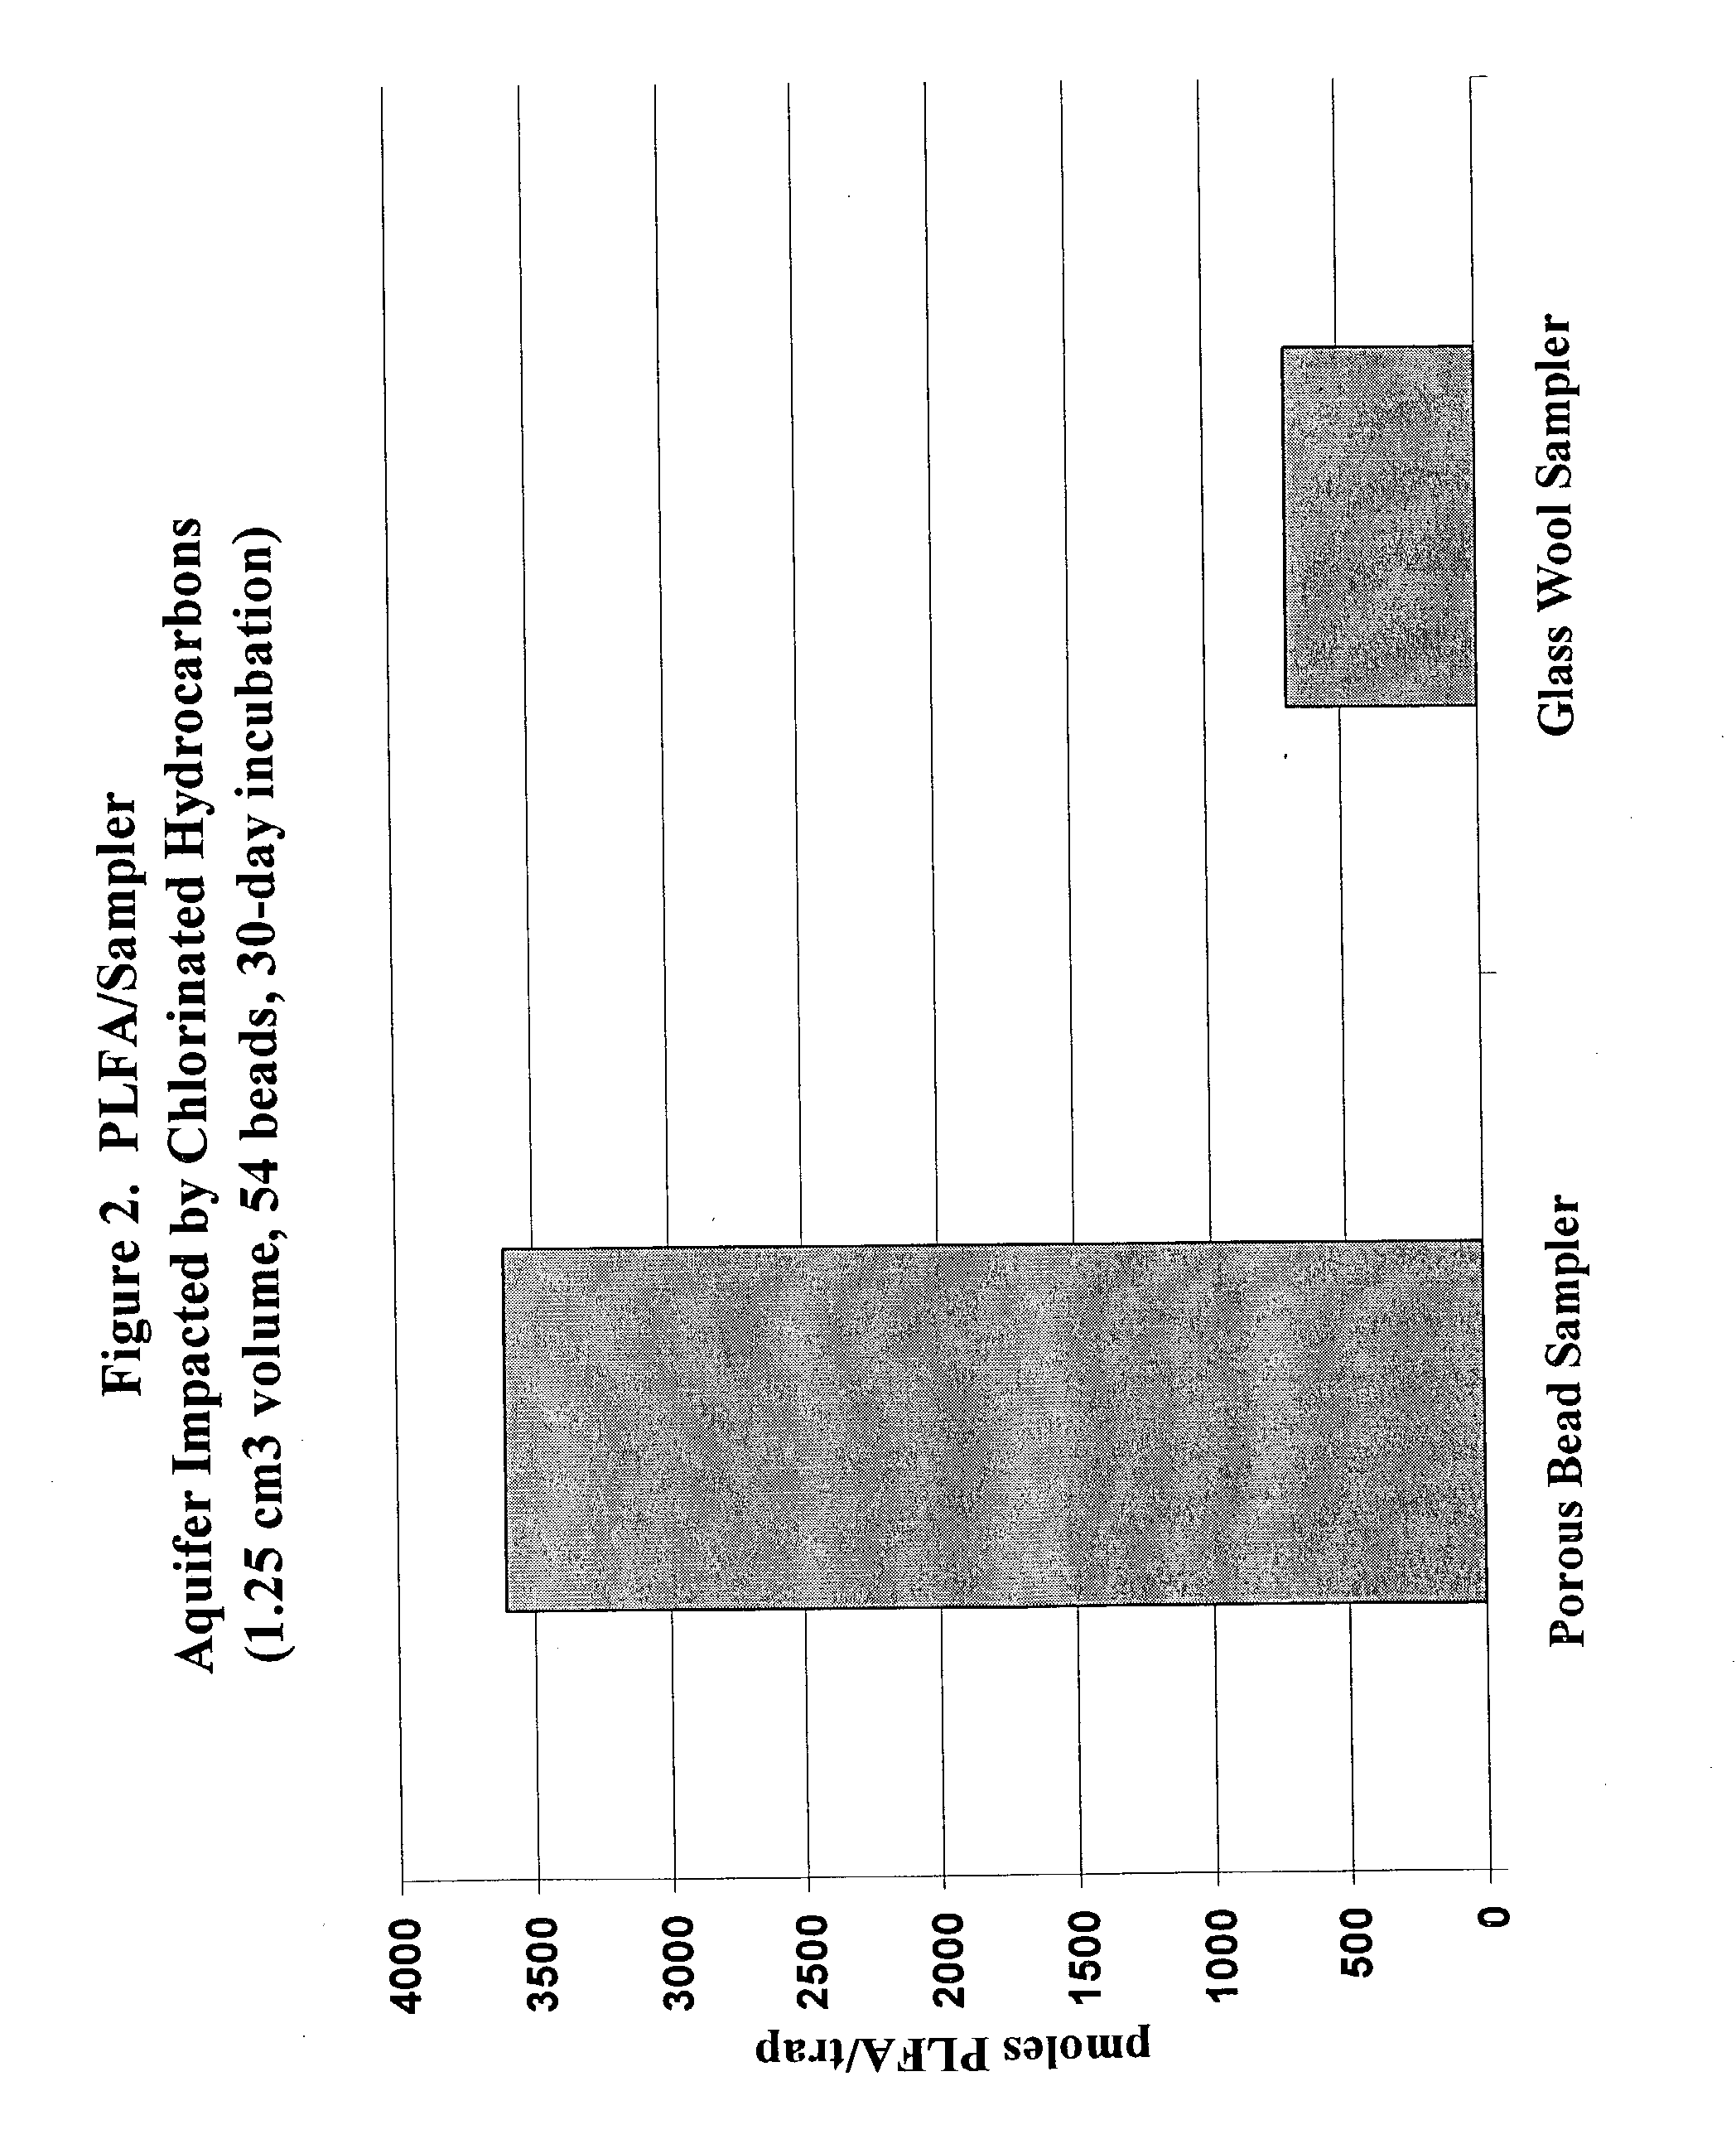 Apparatus and methods for forming microcultures within porous media